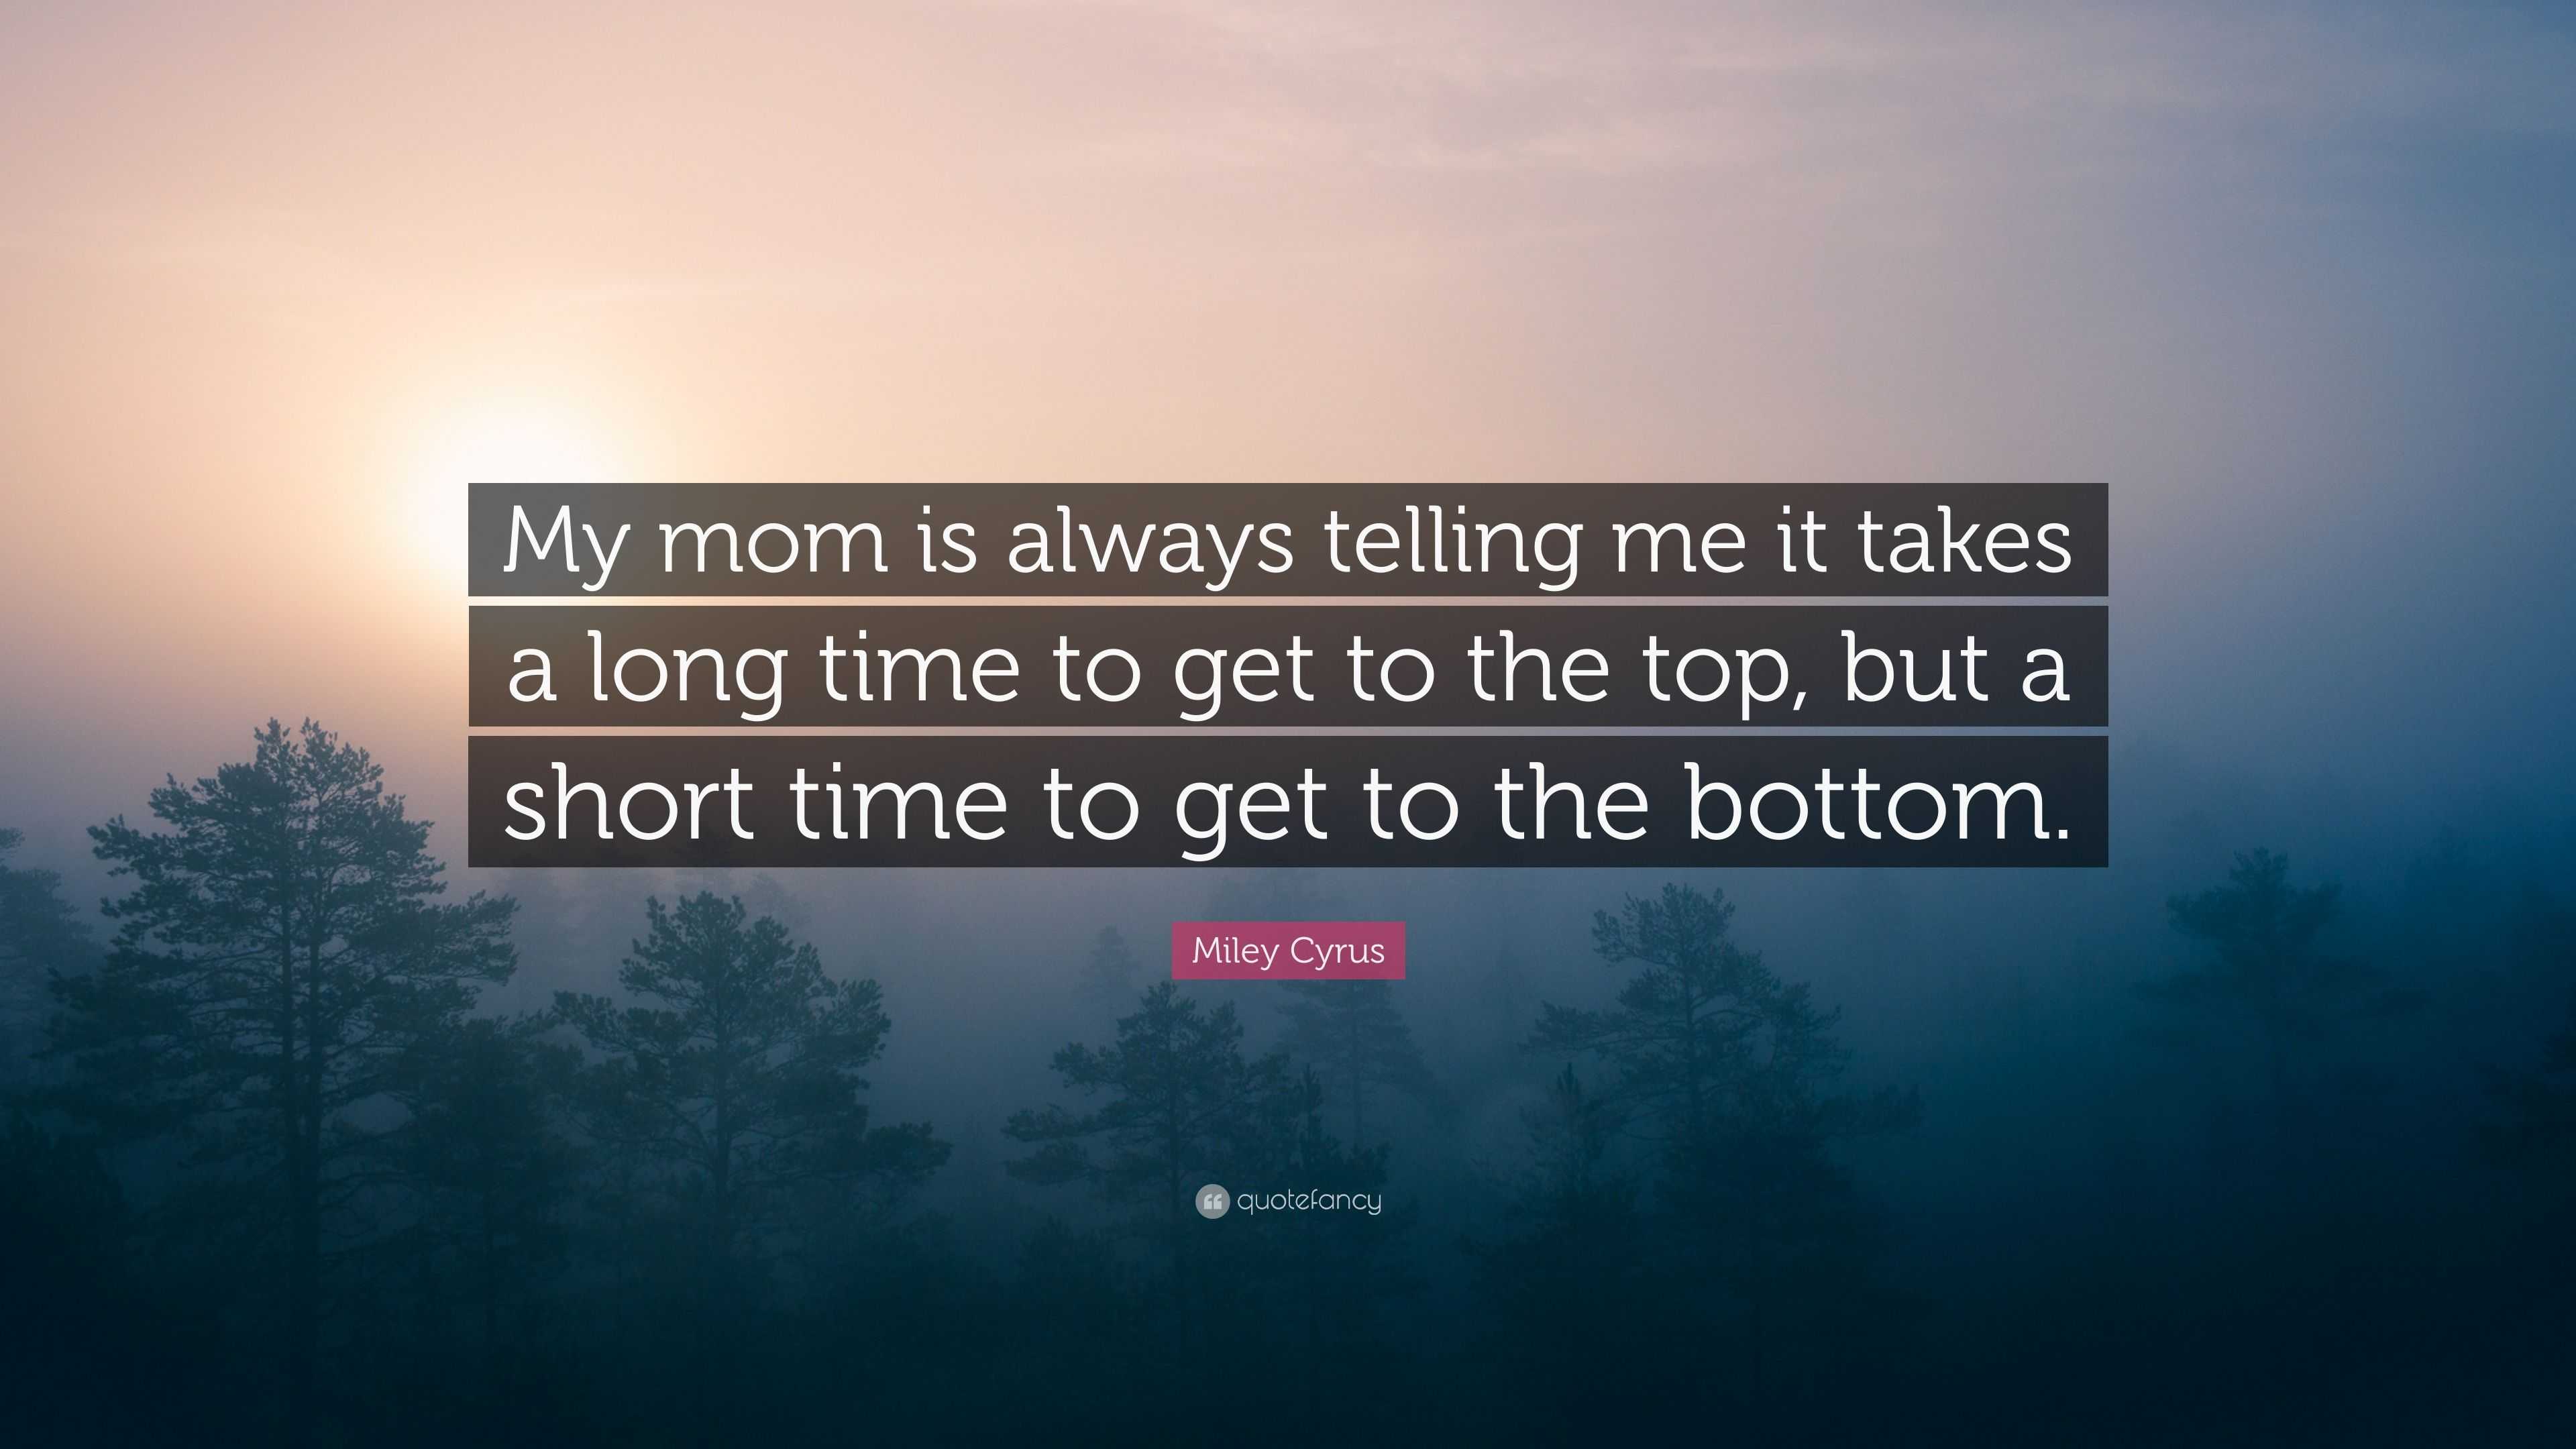 Miley Cyrus Quote: "My mom is always telling me it takes a long time to get to the top, but a ...